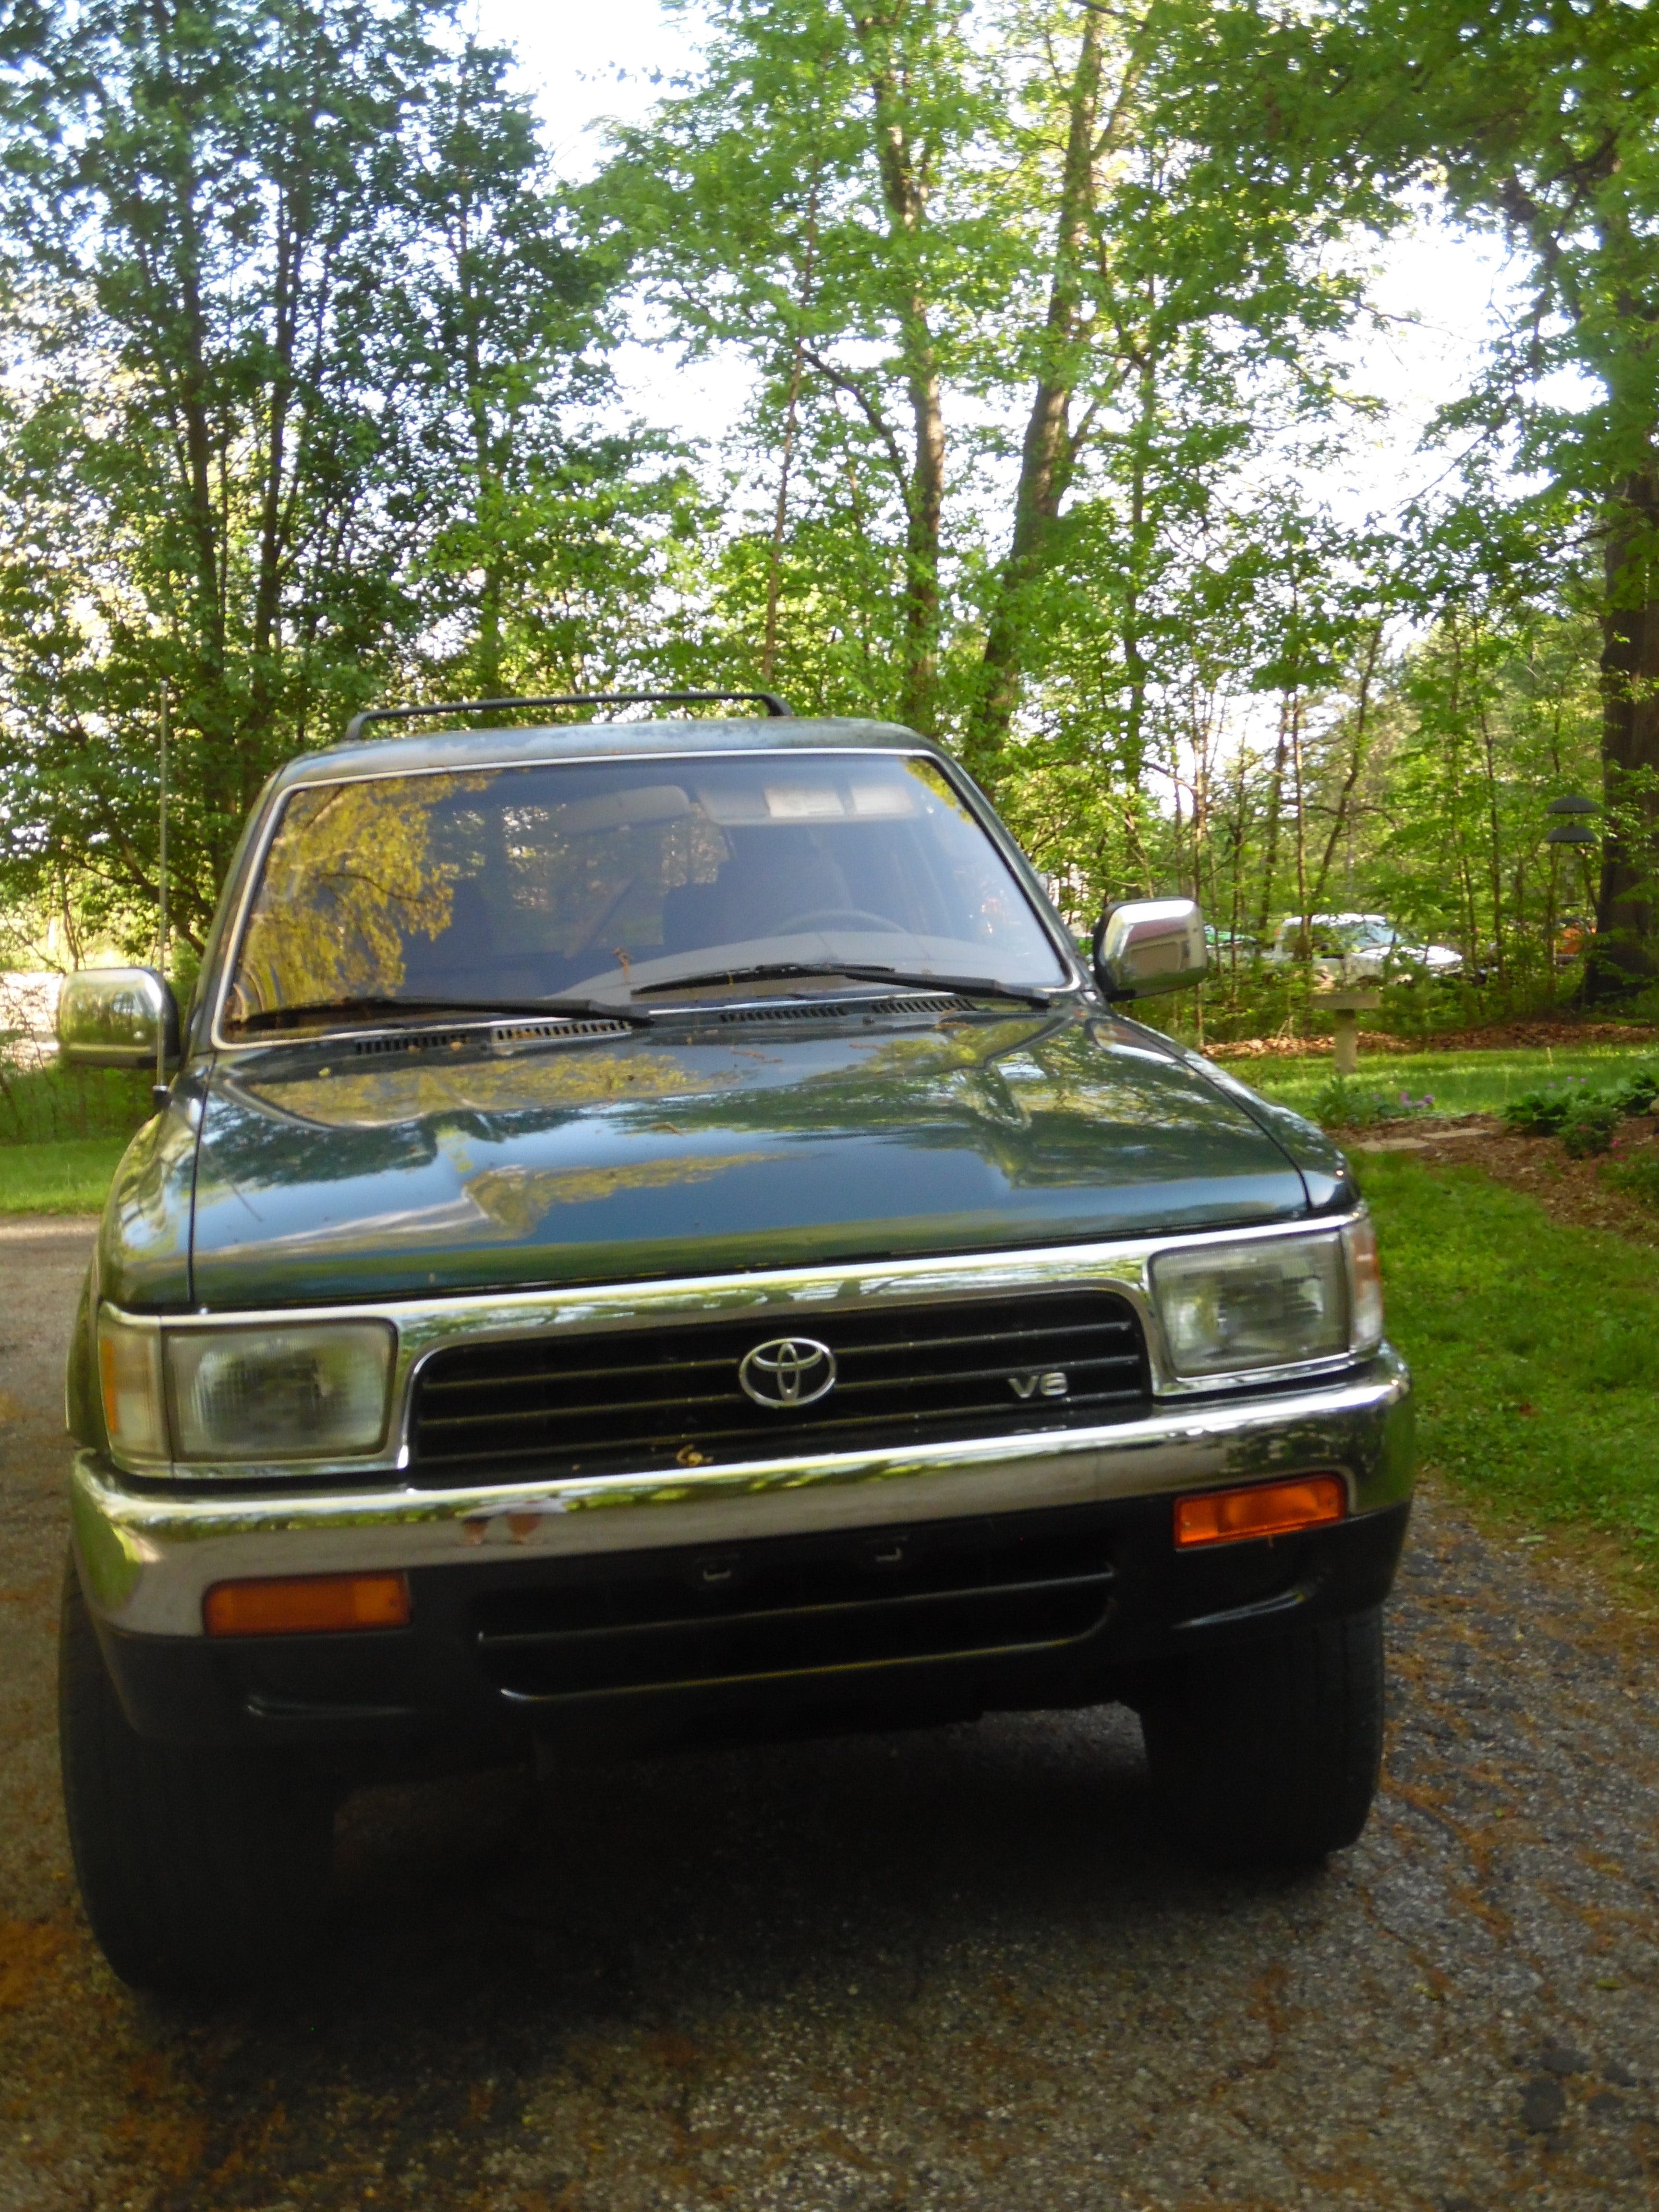 My Favorite Ride: So many Toyotas, so many miles for Bloomington man